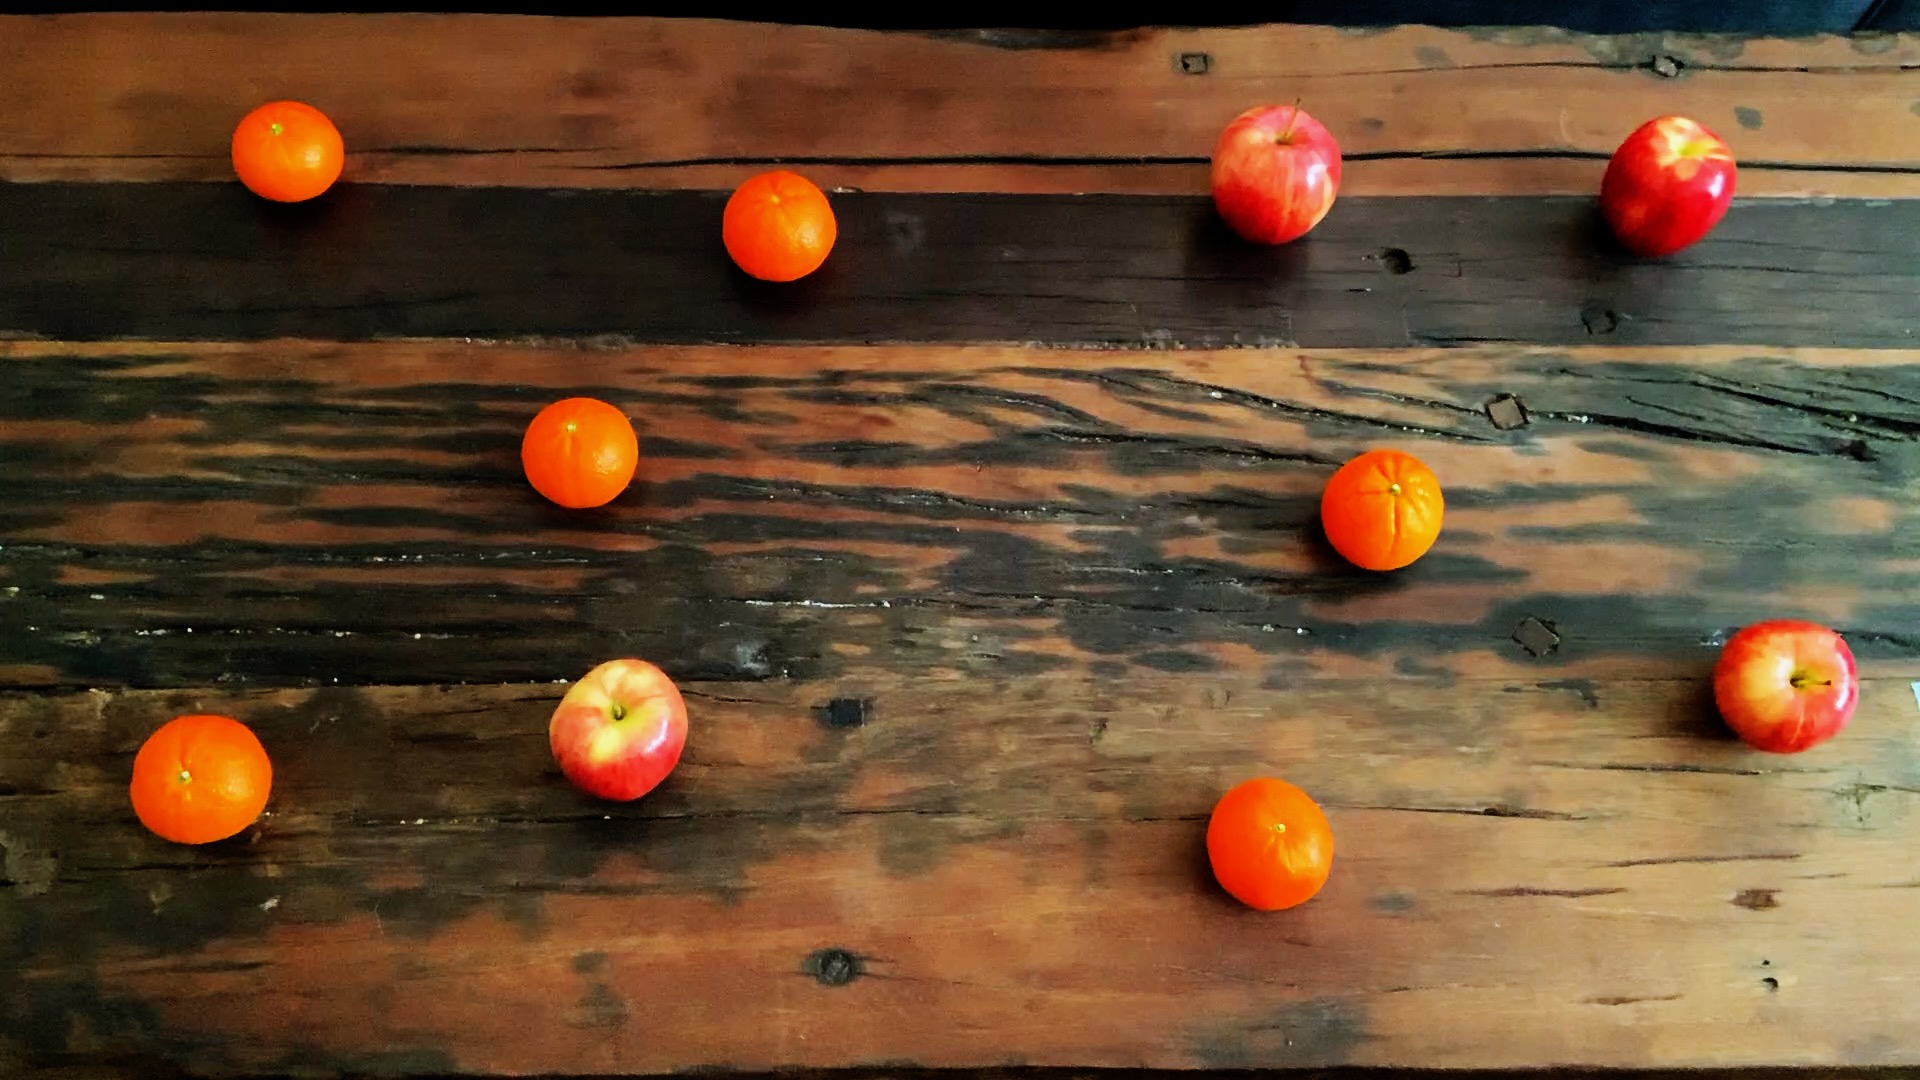 Apples and oranges arranged on a table with most of the apples on the right side